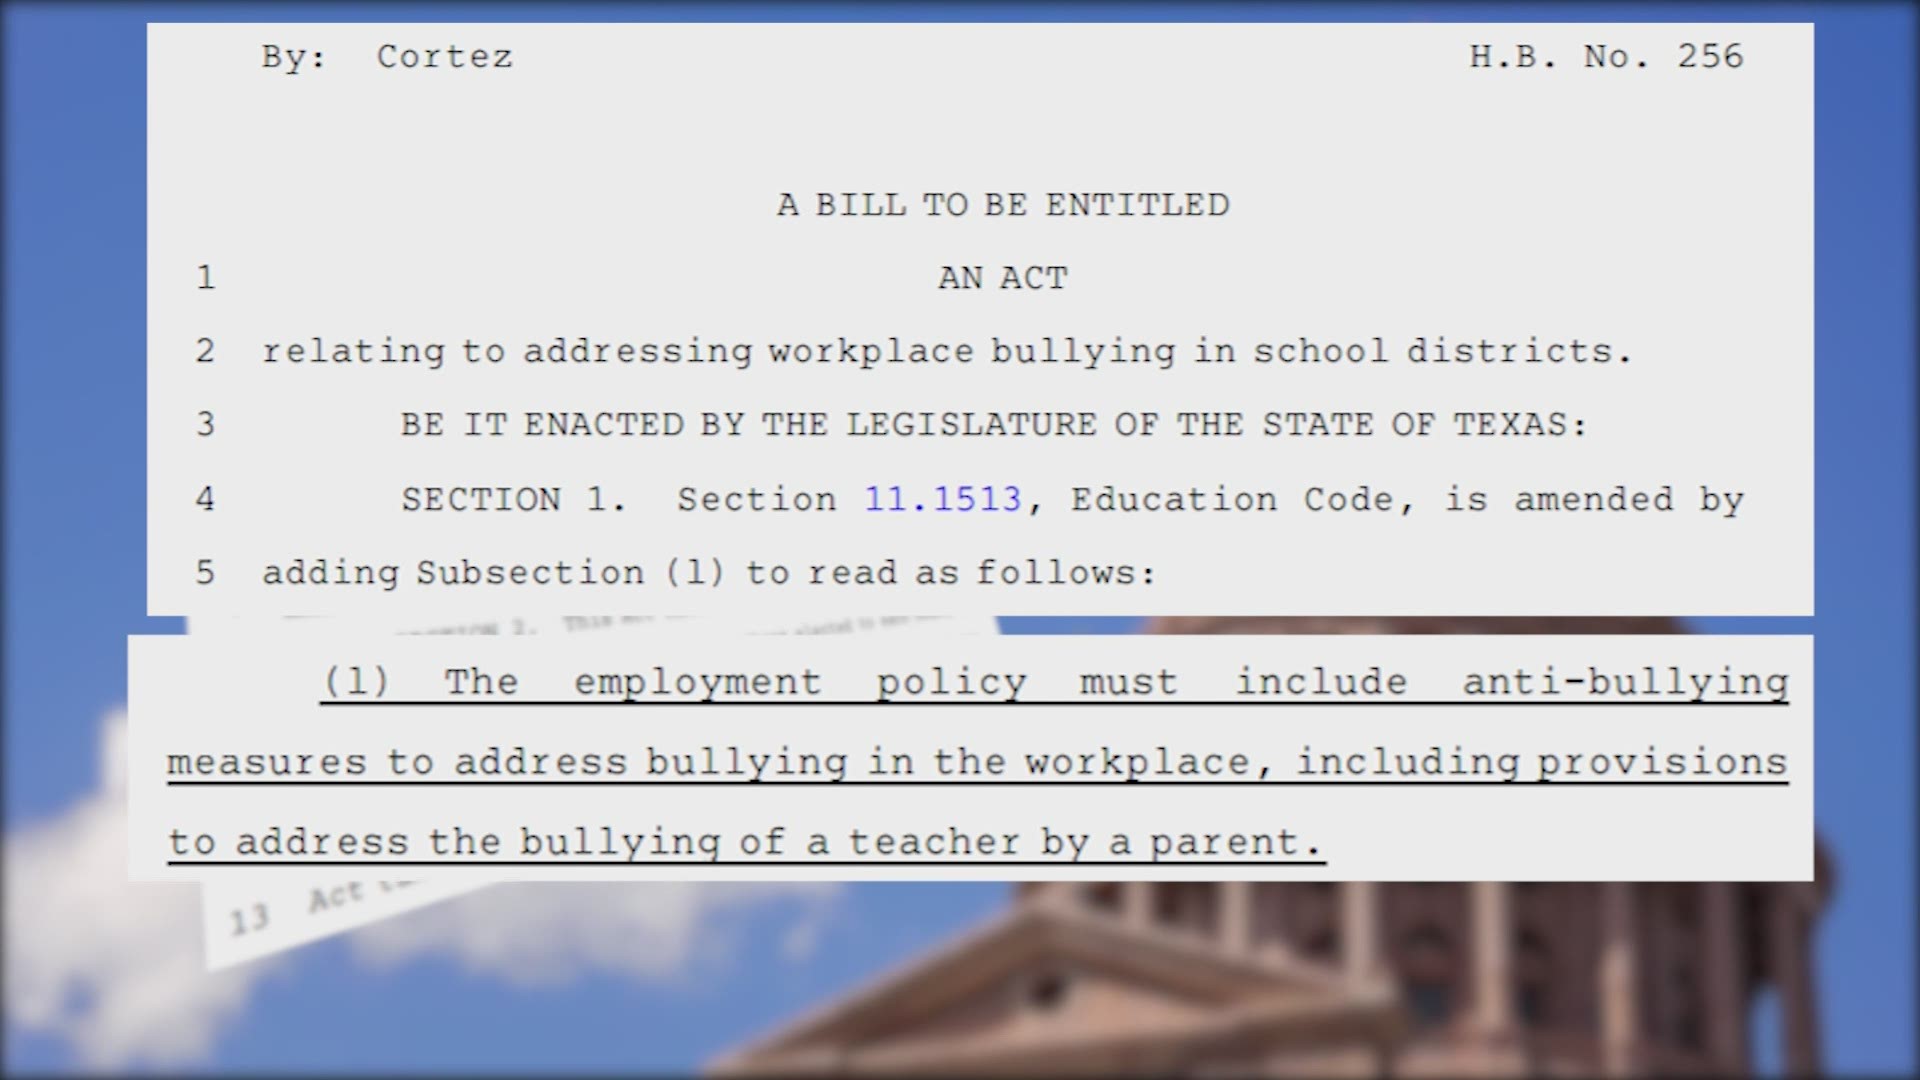 House Bill 256 would require school districts to implement workplace bullying policies.